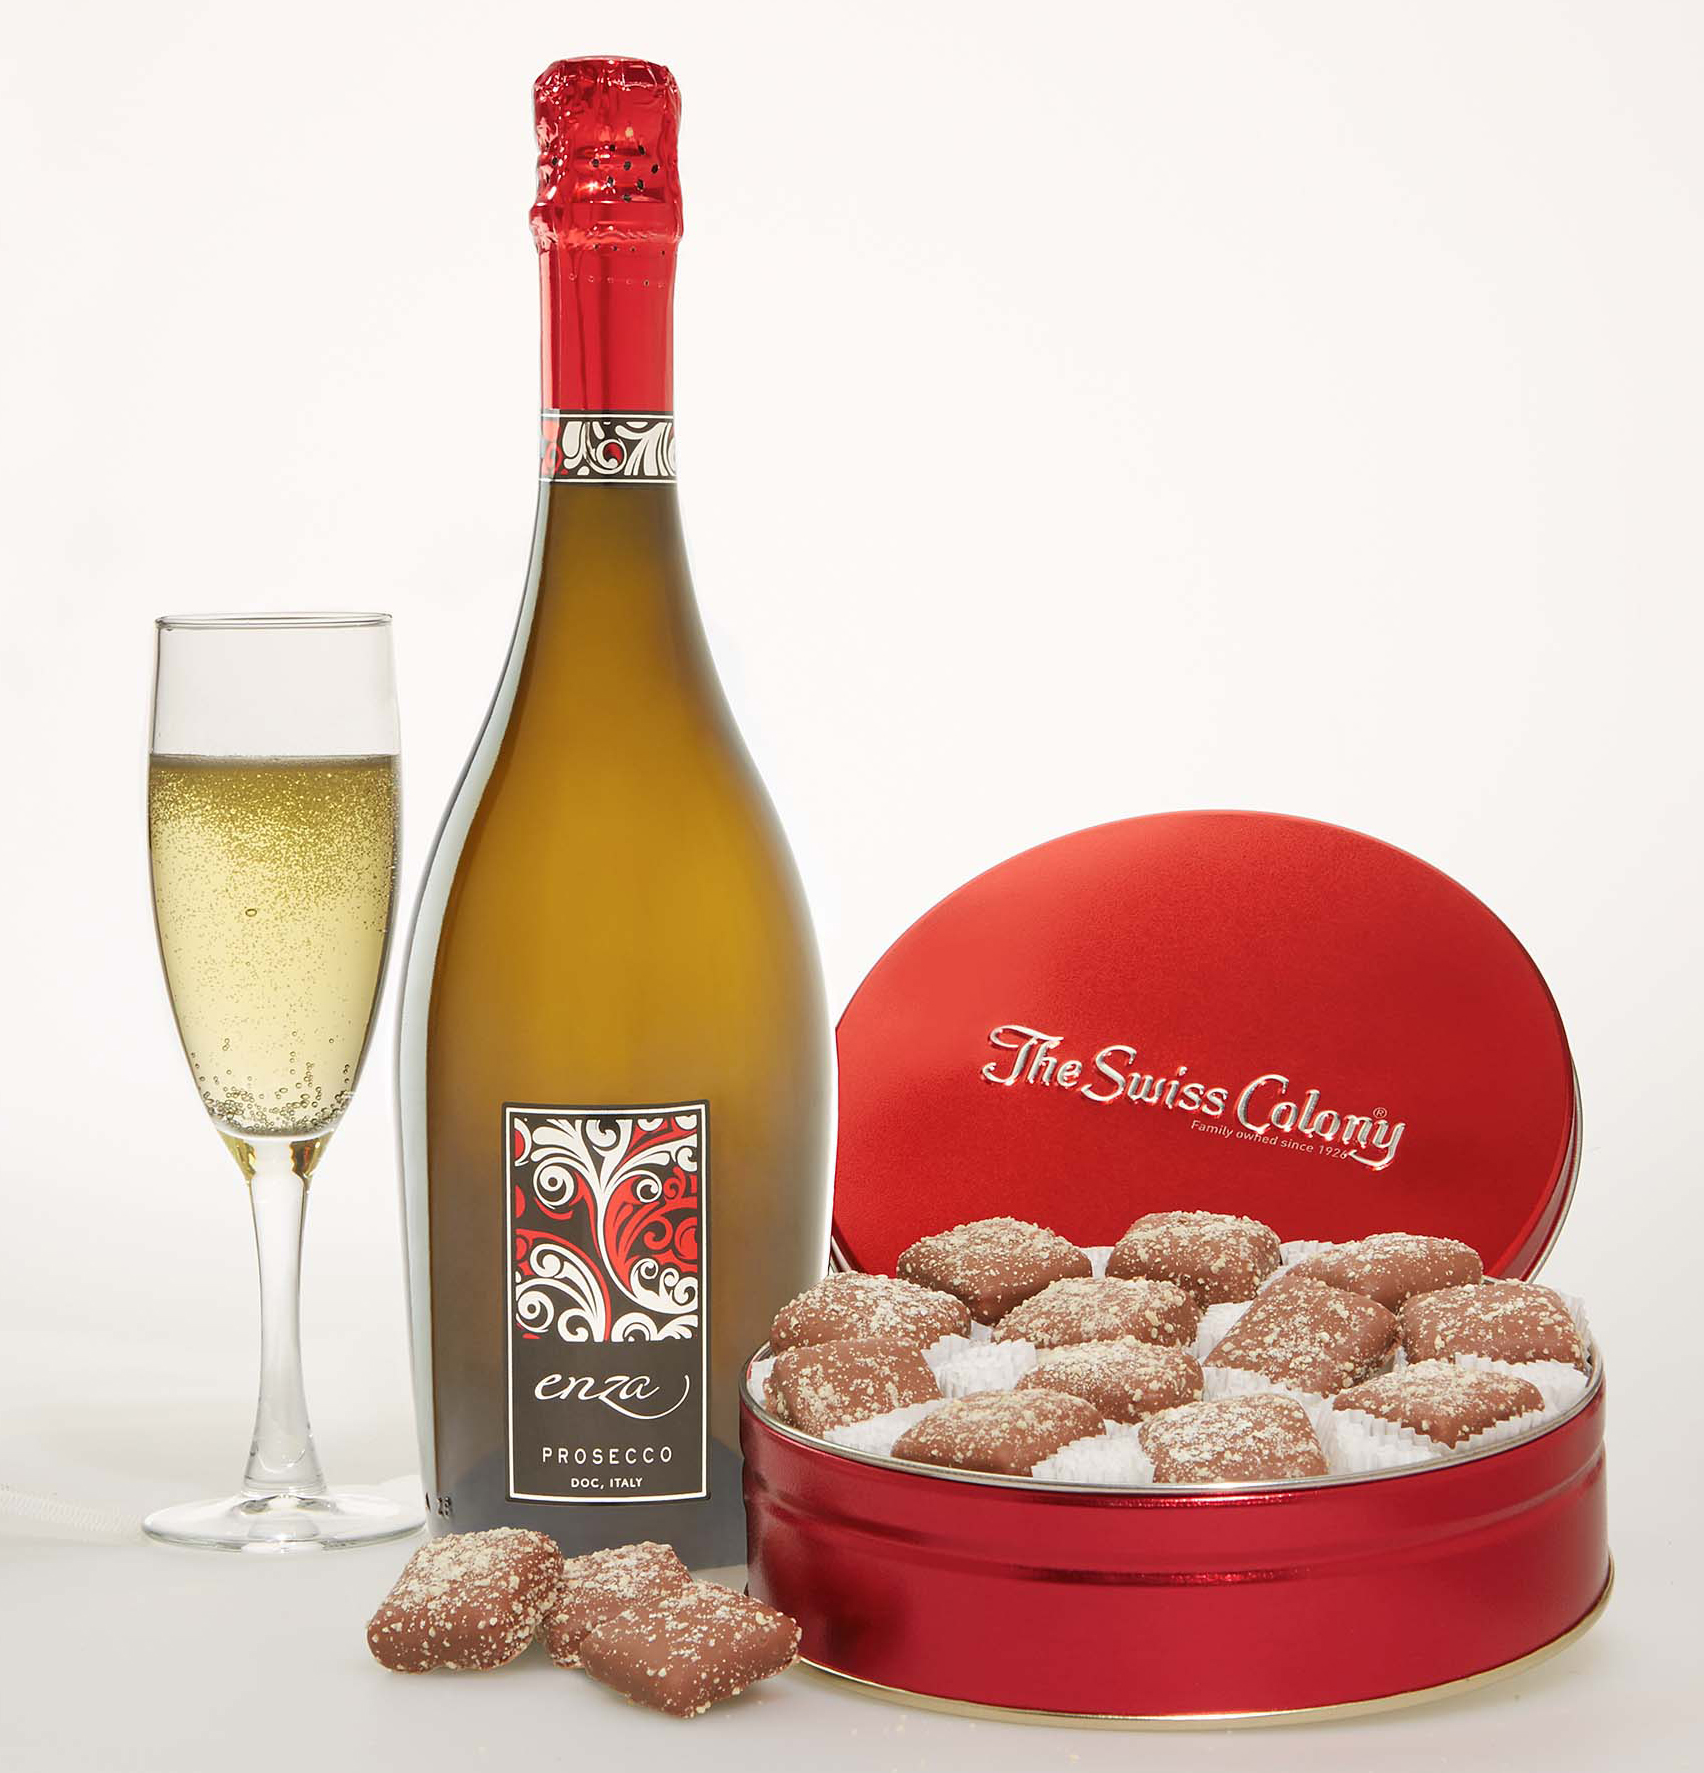 Swiss Colony's famous butter toffee pairs well with a bubbly Prosecco.